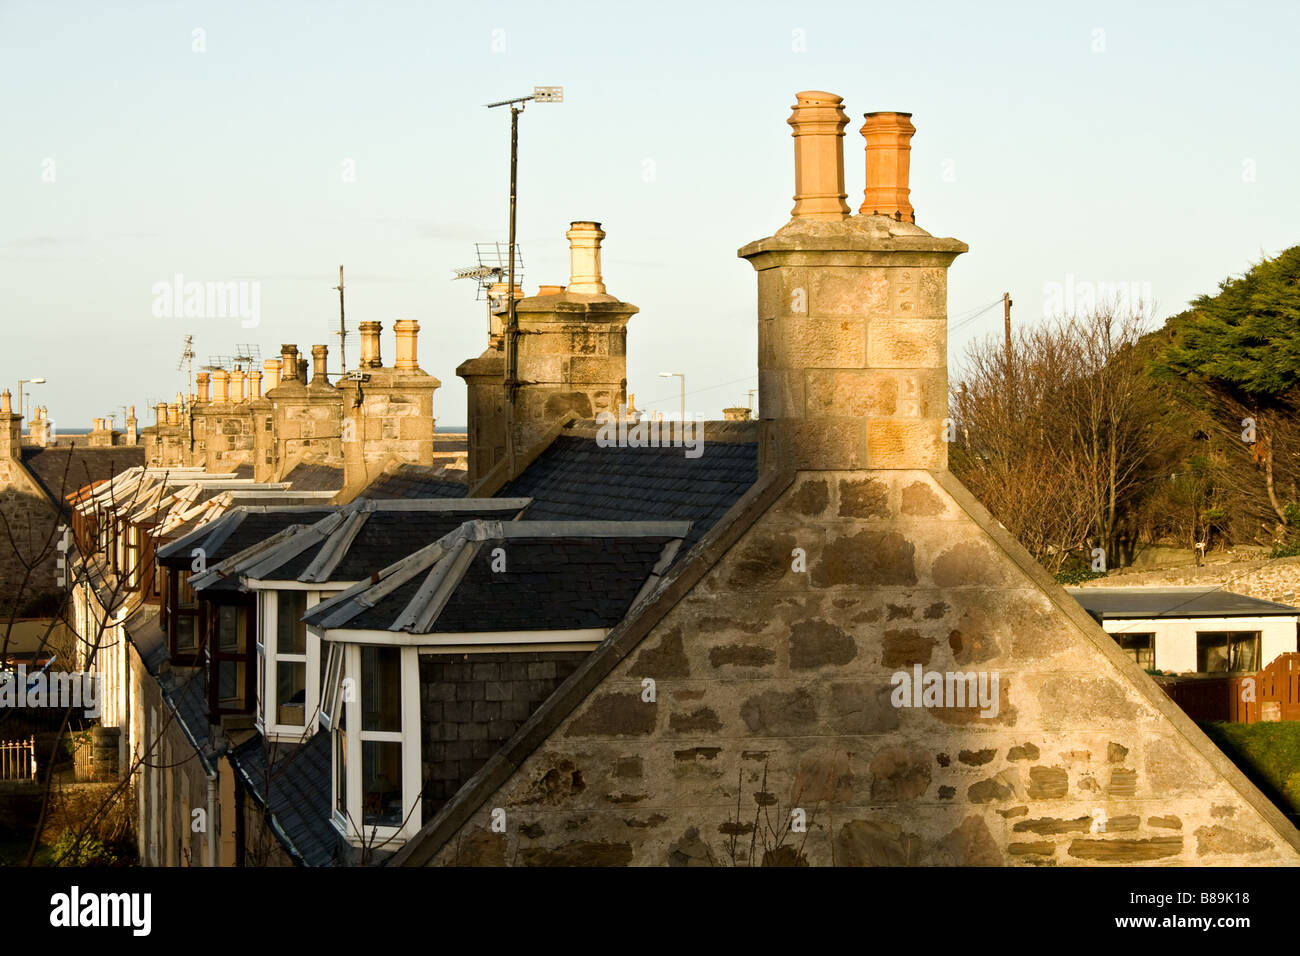 Row of Stone houses with chimneys and white framed windows in Buckie, Scotland Stock Photo